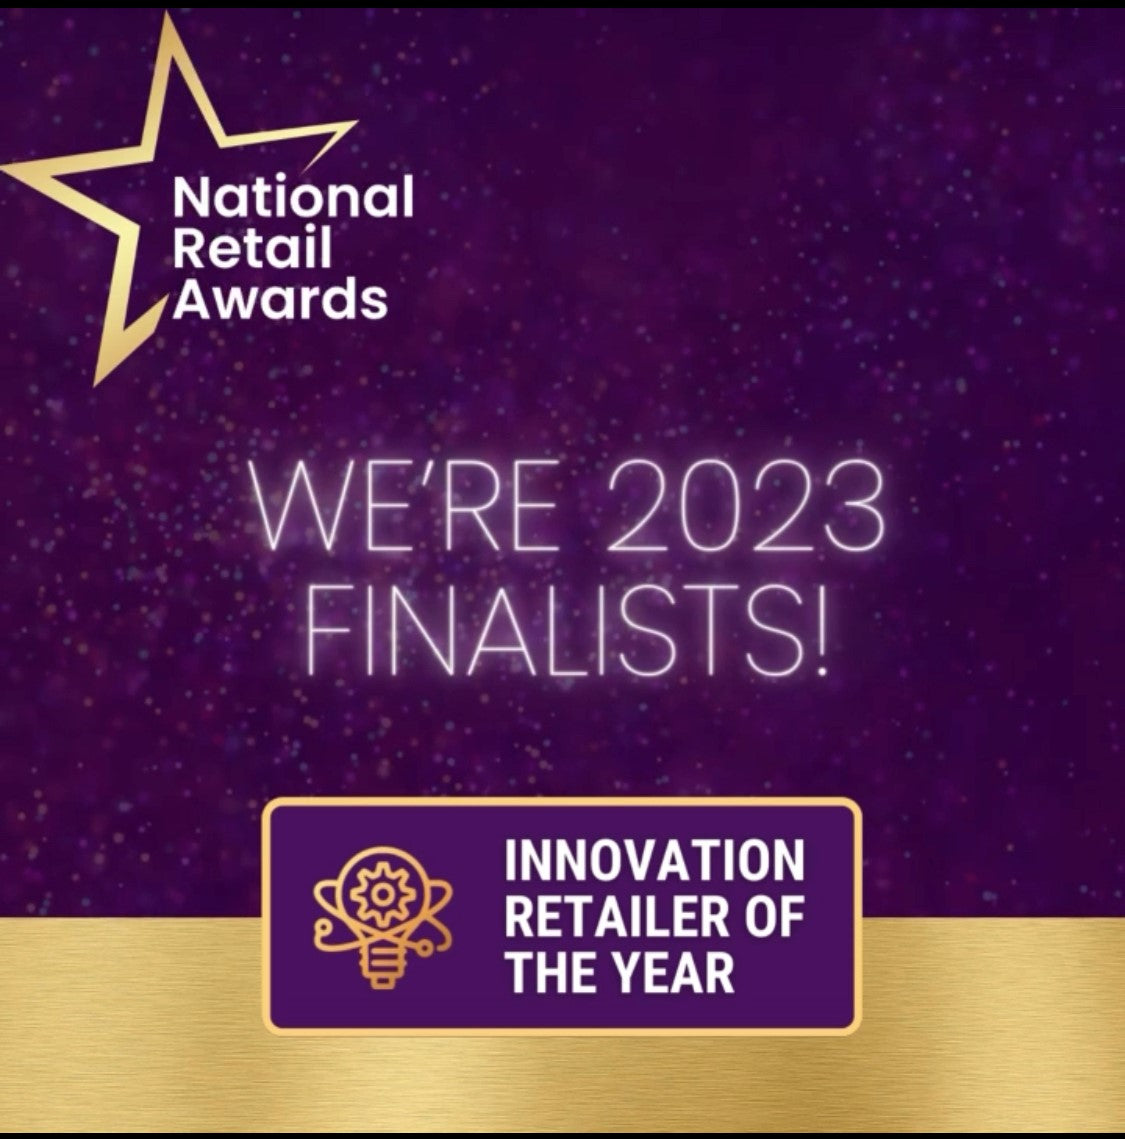 We are finalist in The National Retail Awards in 4 categories!!! Innovation Retailer of the Year 2023